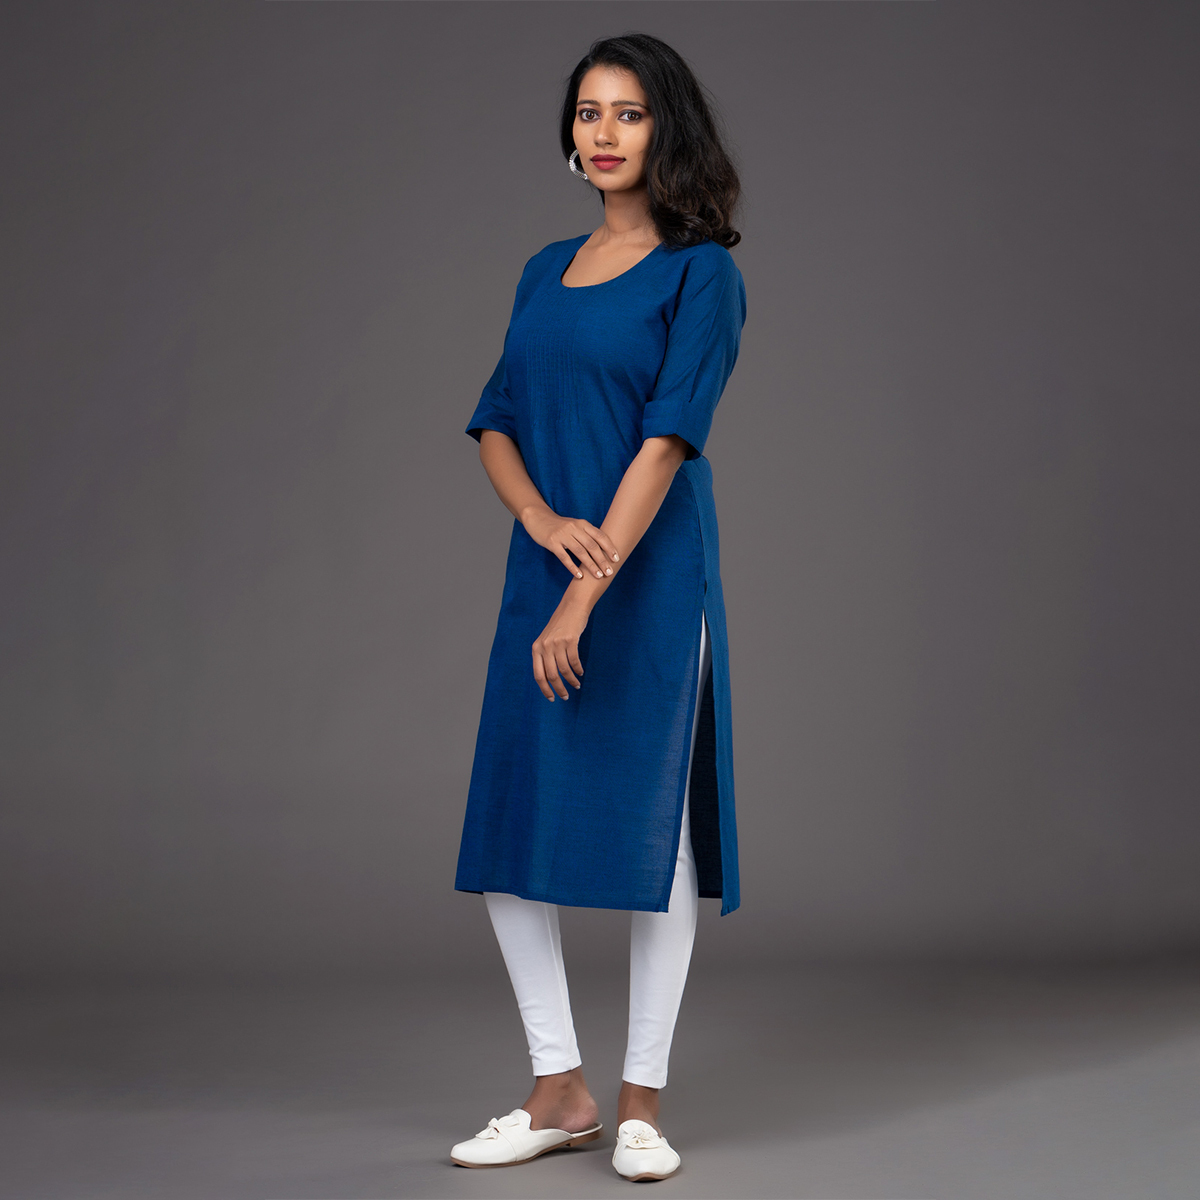 Zella Solid Color Side Slitted Straight Cut Kurta with Pin Tucked Yoke & Keyhole Back Neck - Royal Blue